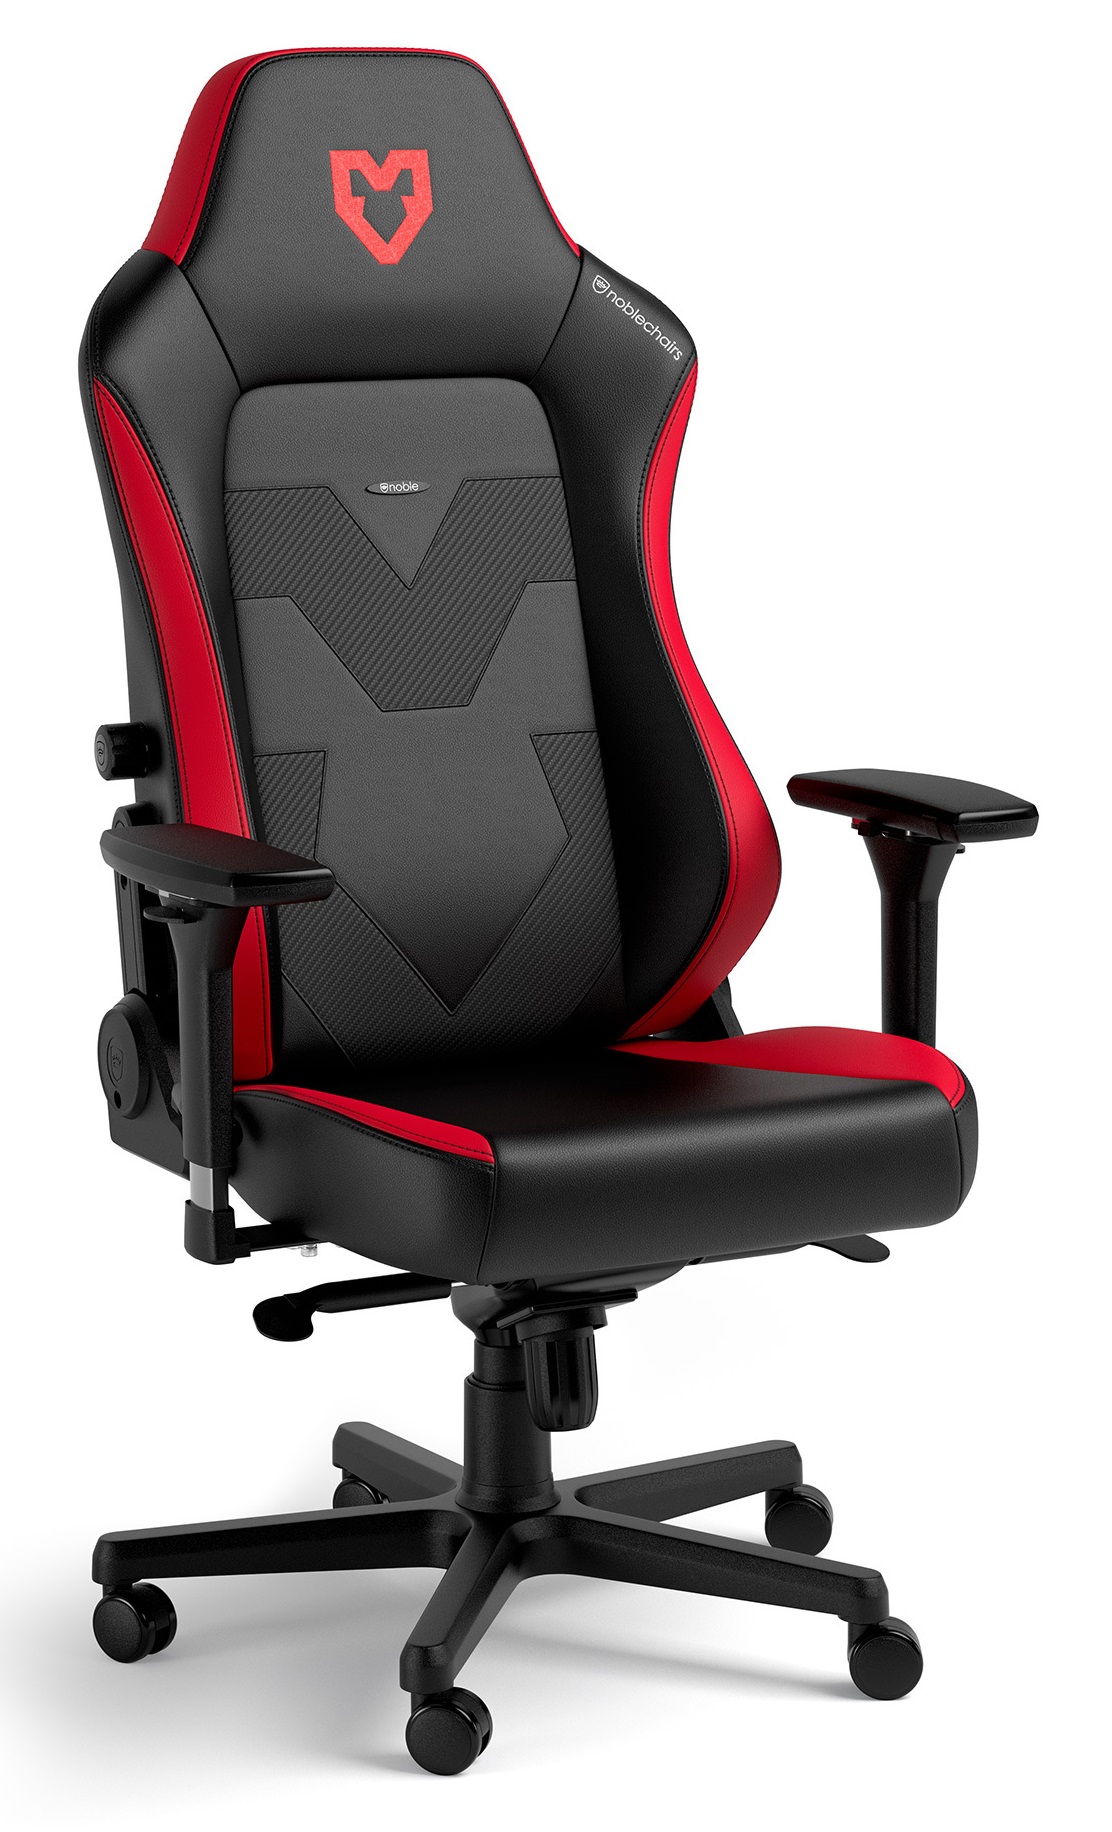 noblechairs - noblechairs HERO Gaming Chair MOUZ Esports Edition - Black/Red